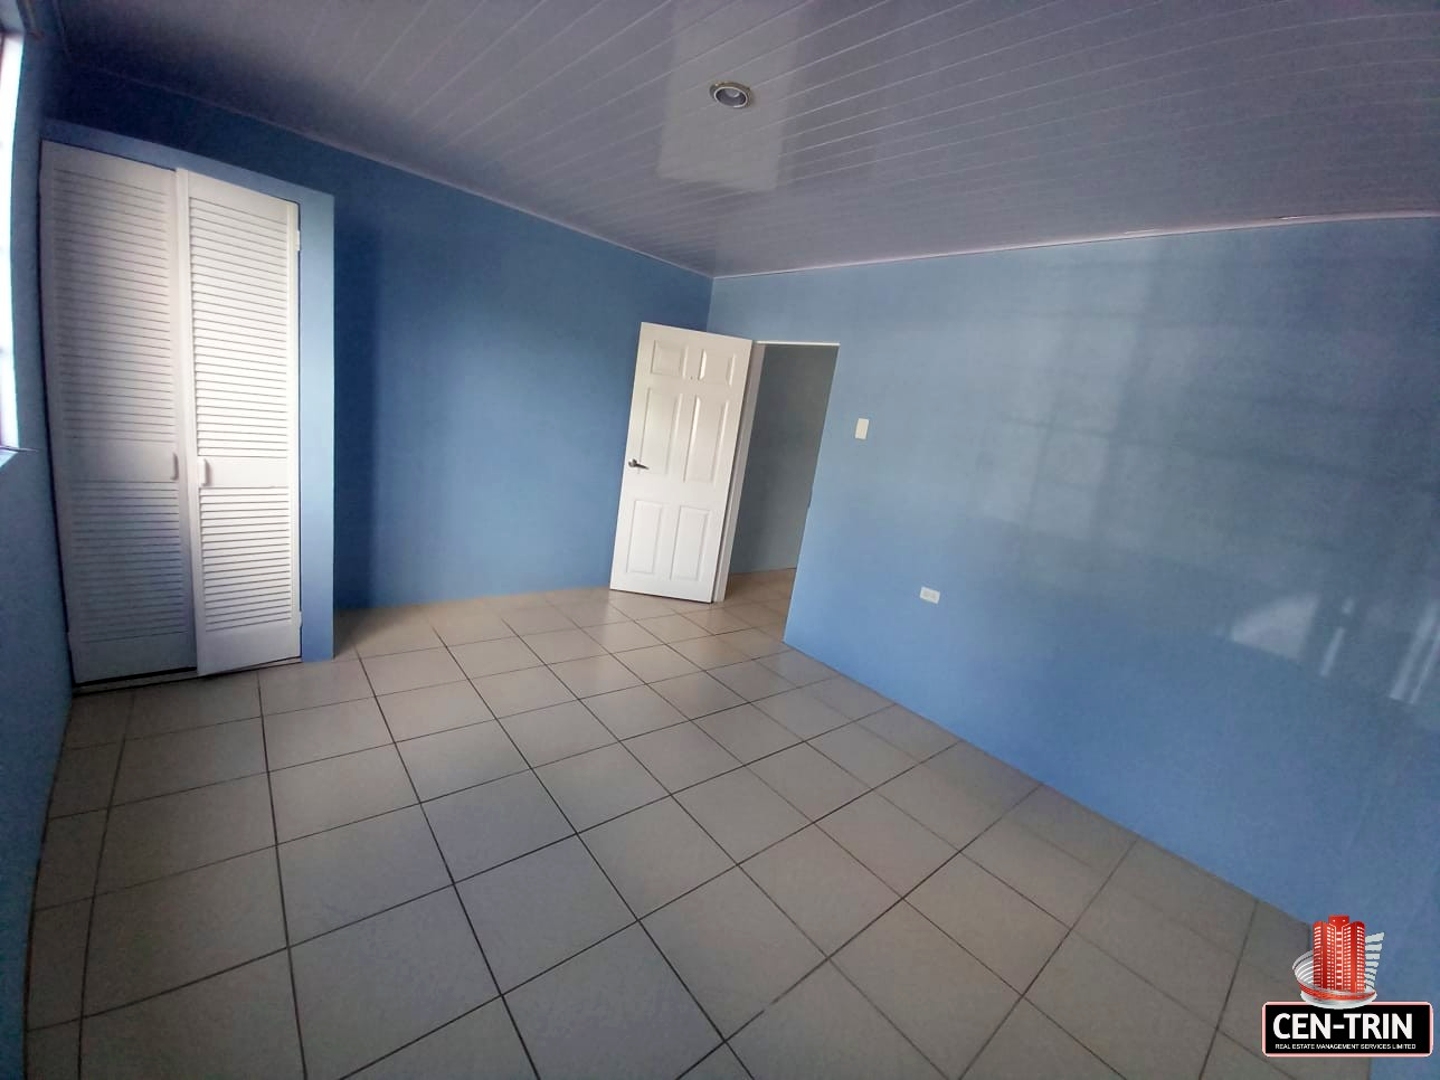 Empty room with blue walls and a white door.